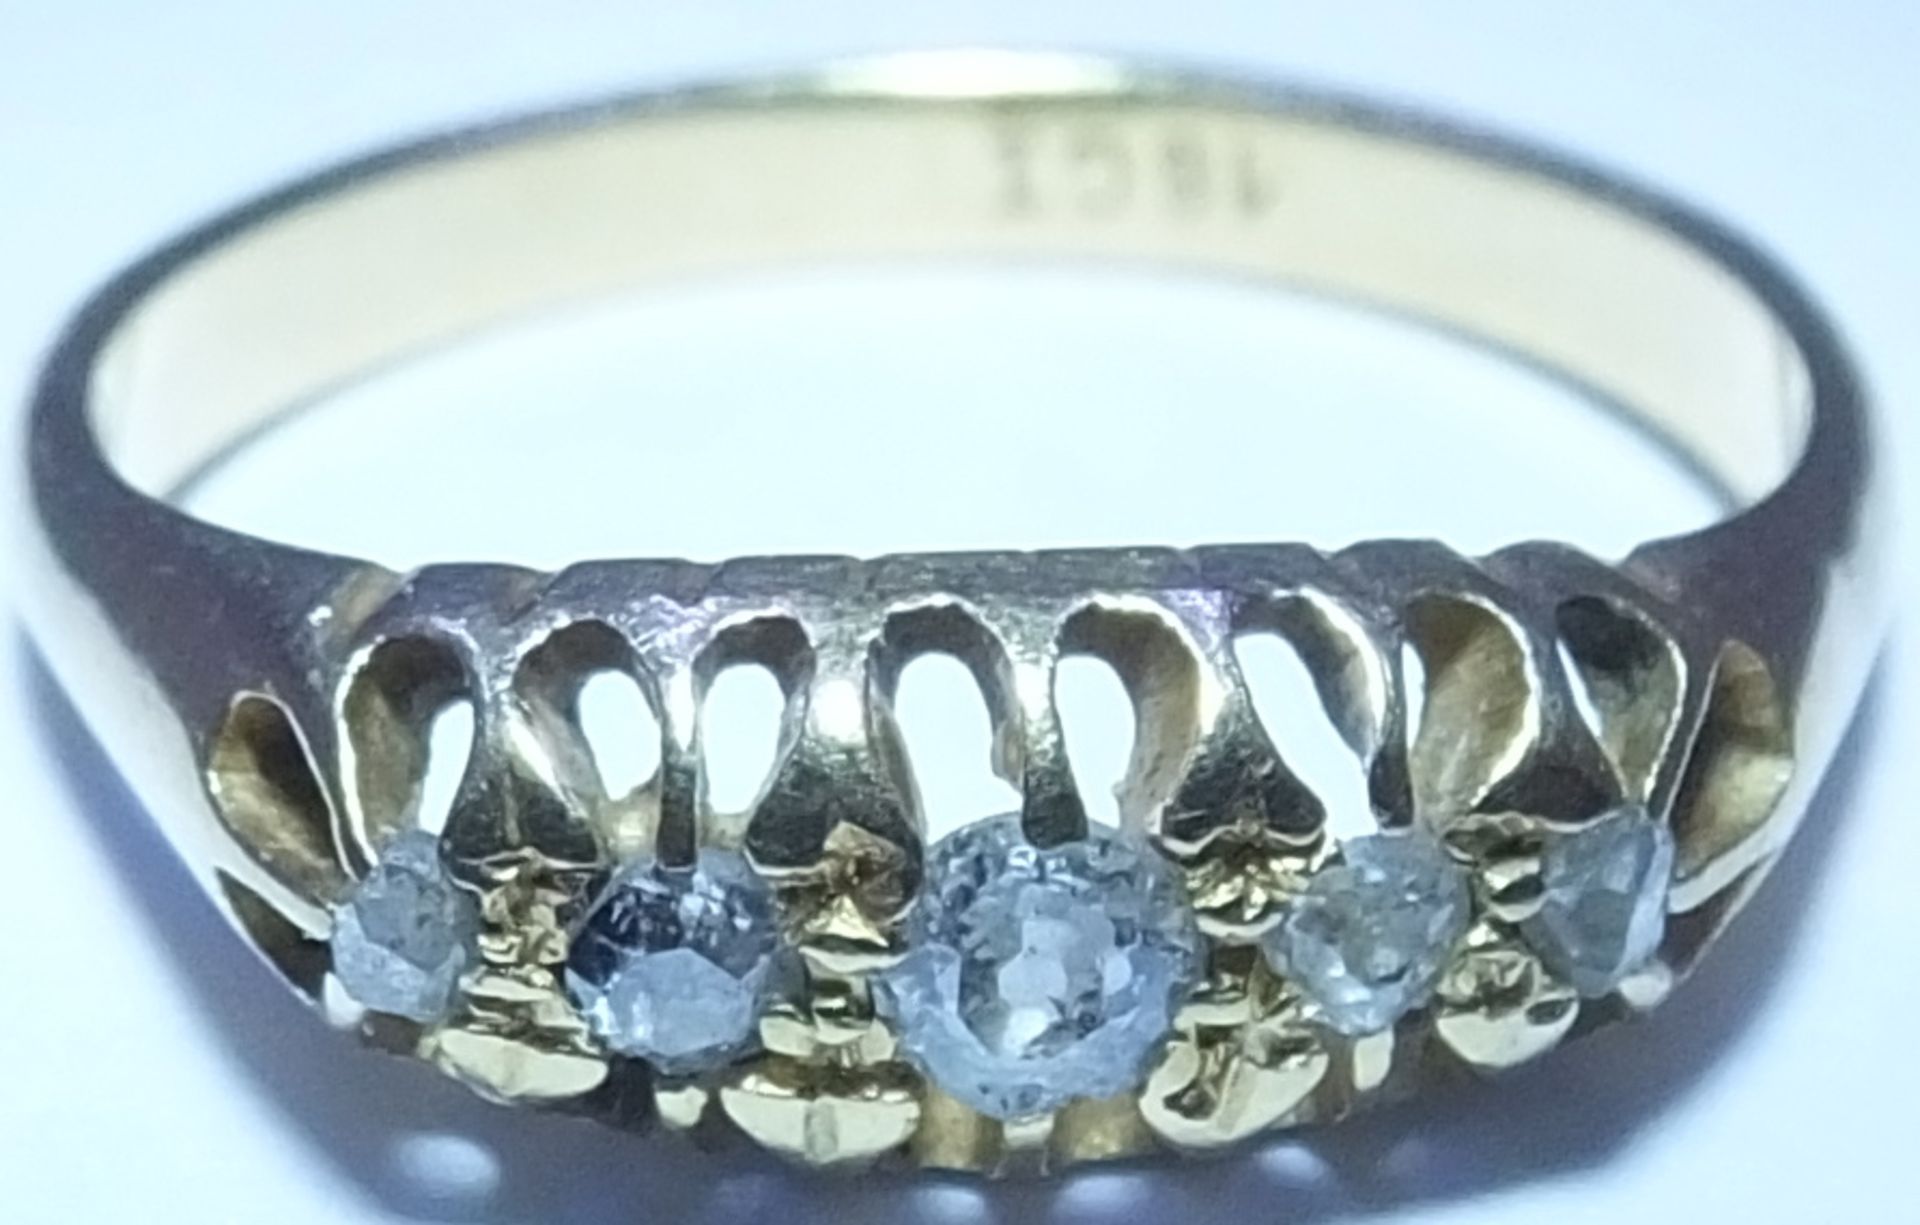 An early 20th century 18ct gold five-stone ring. Designed as a graduated circular-cut diamond